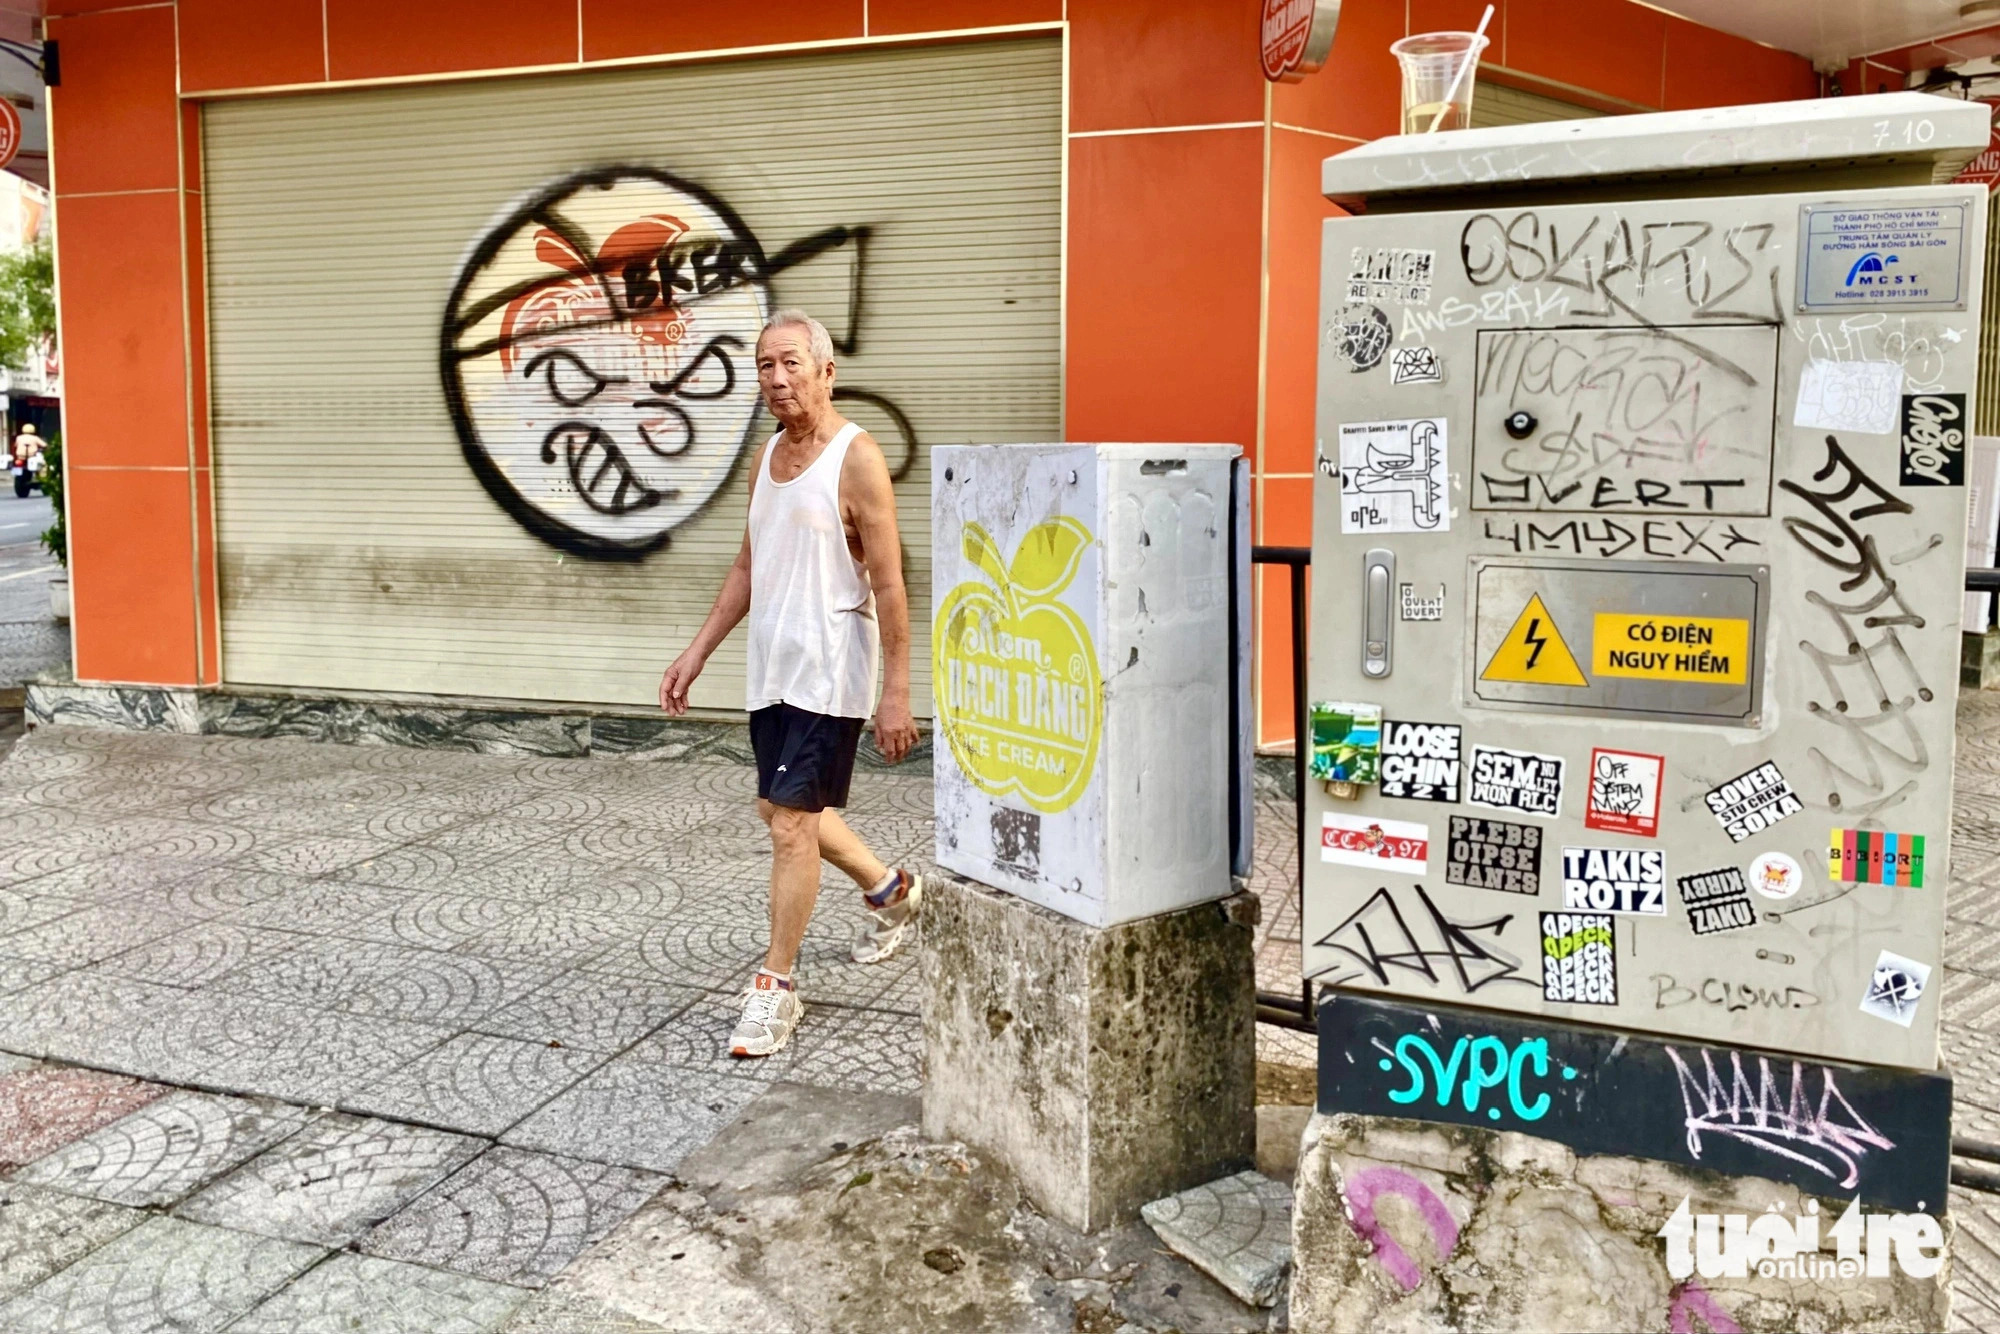 Aside from roll-up doors, plenty of walls, electricity transformer boxes, bus stations became victims of graffiti vandals. Photo: Tien Quoc / Tuoi Tre